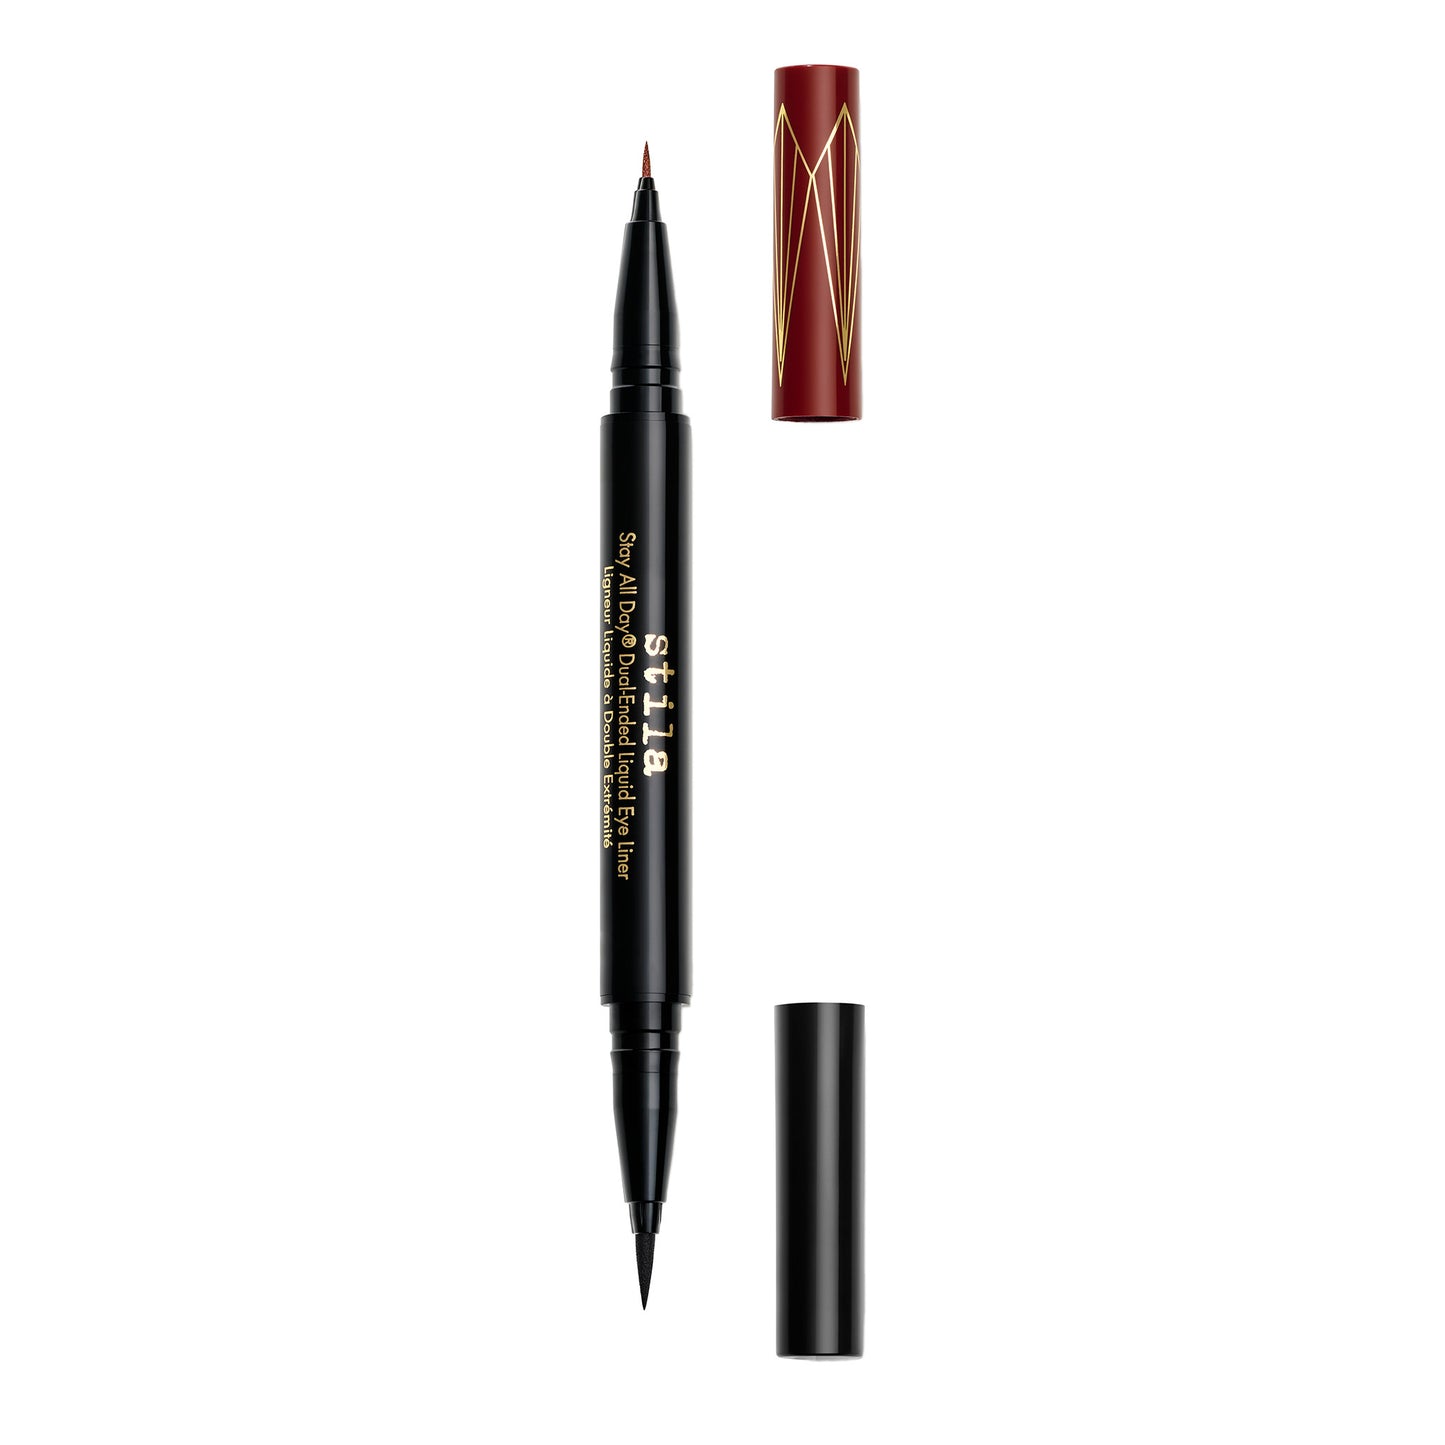 Stila Stay All Day® Dual-Ended Waterproof Liquid Eye Liner: Shimmer Micro Tip Sangria and Intense Black